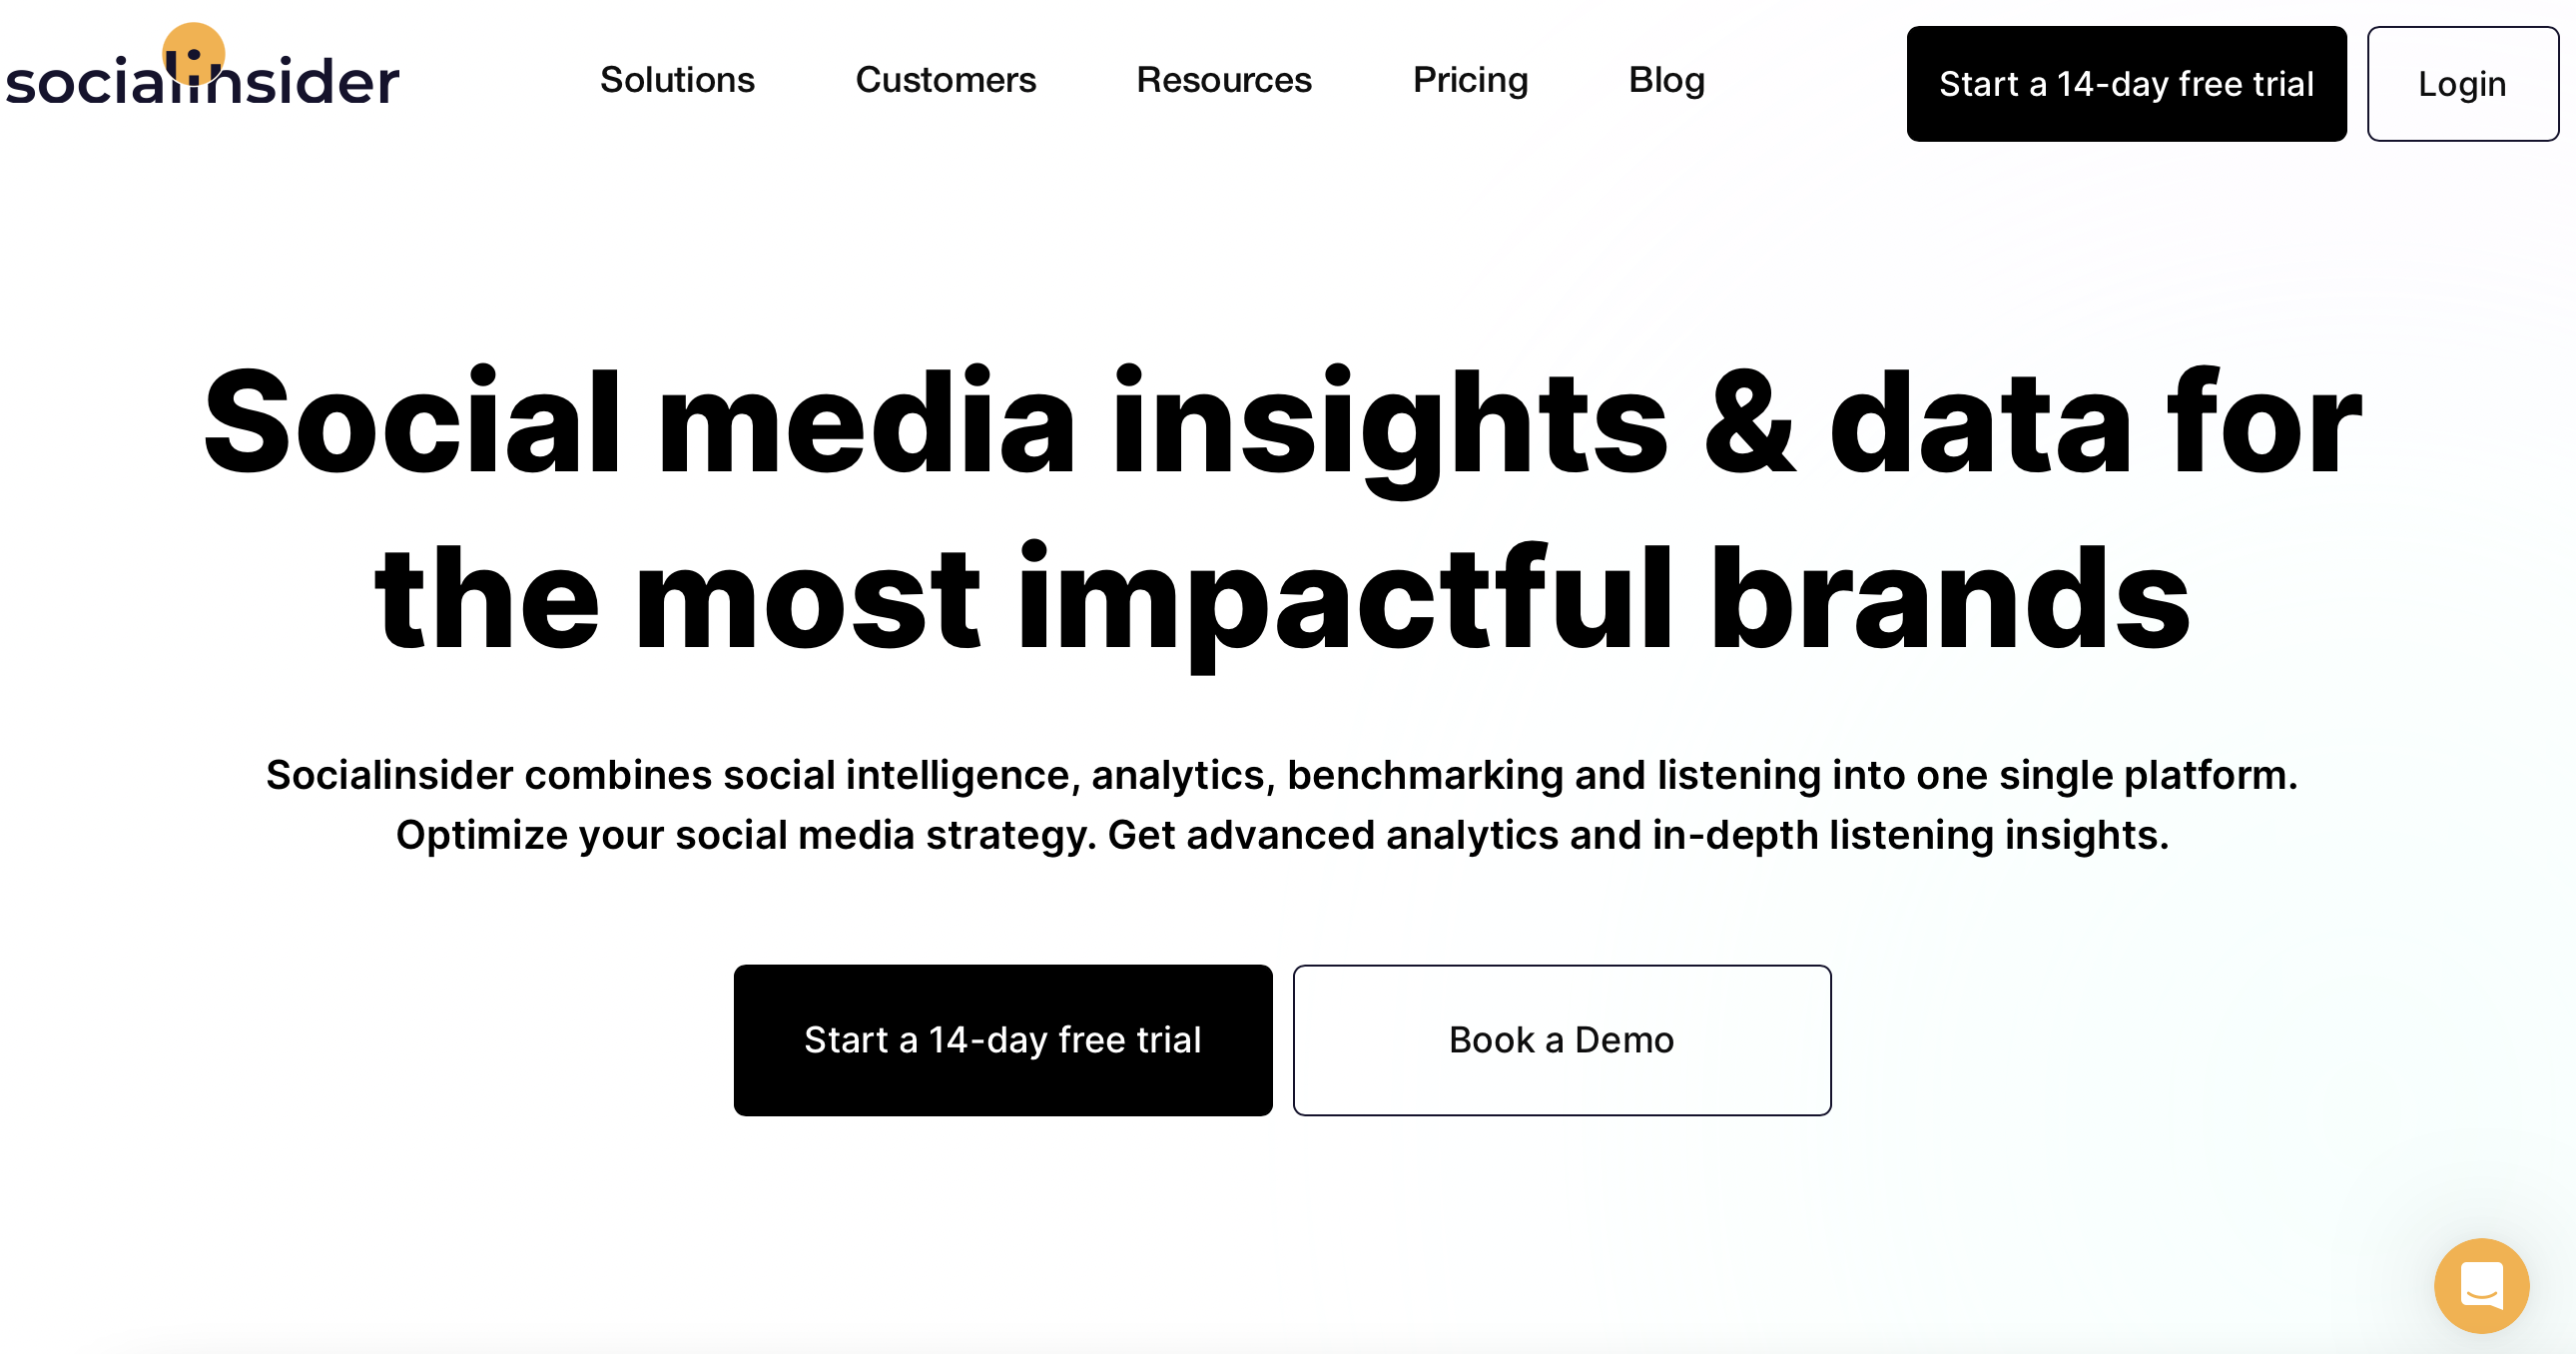 socialinsider homepage showing text that reads "social media insights and data for the most impactful brands"